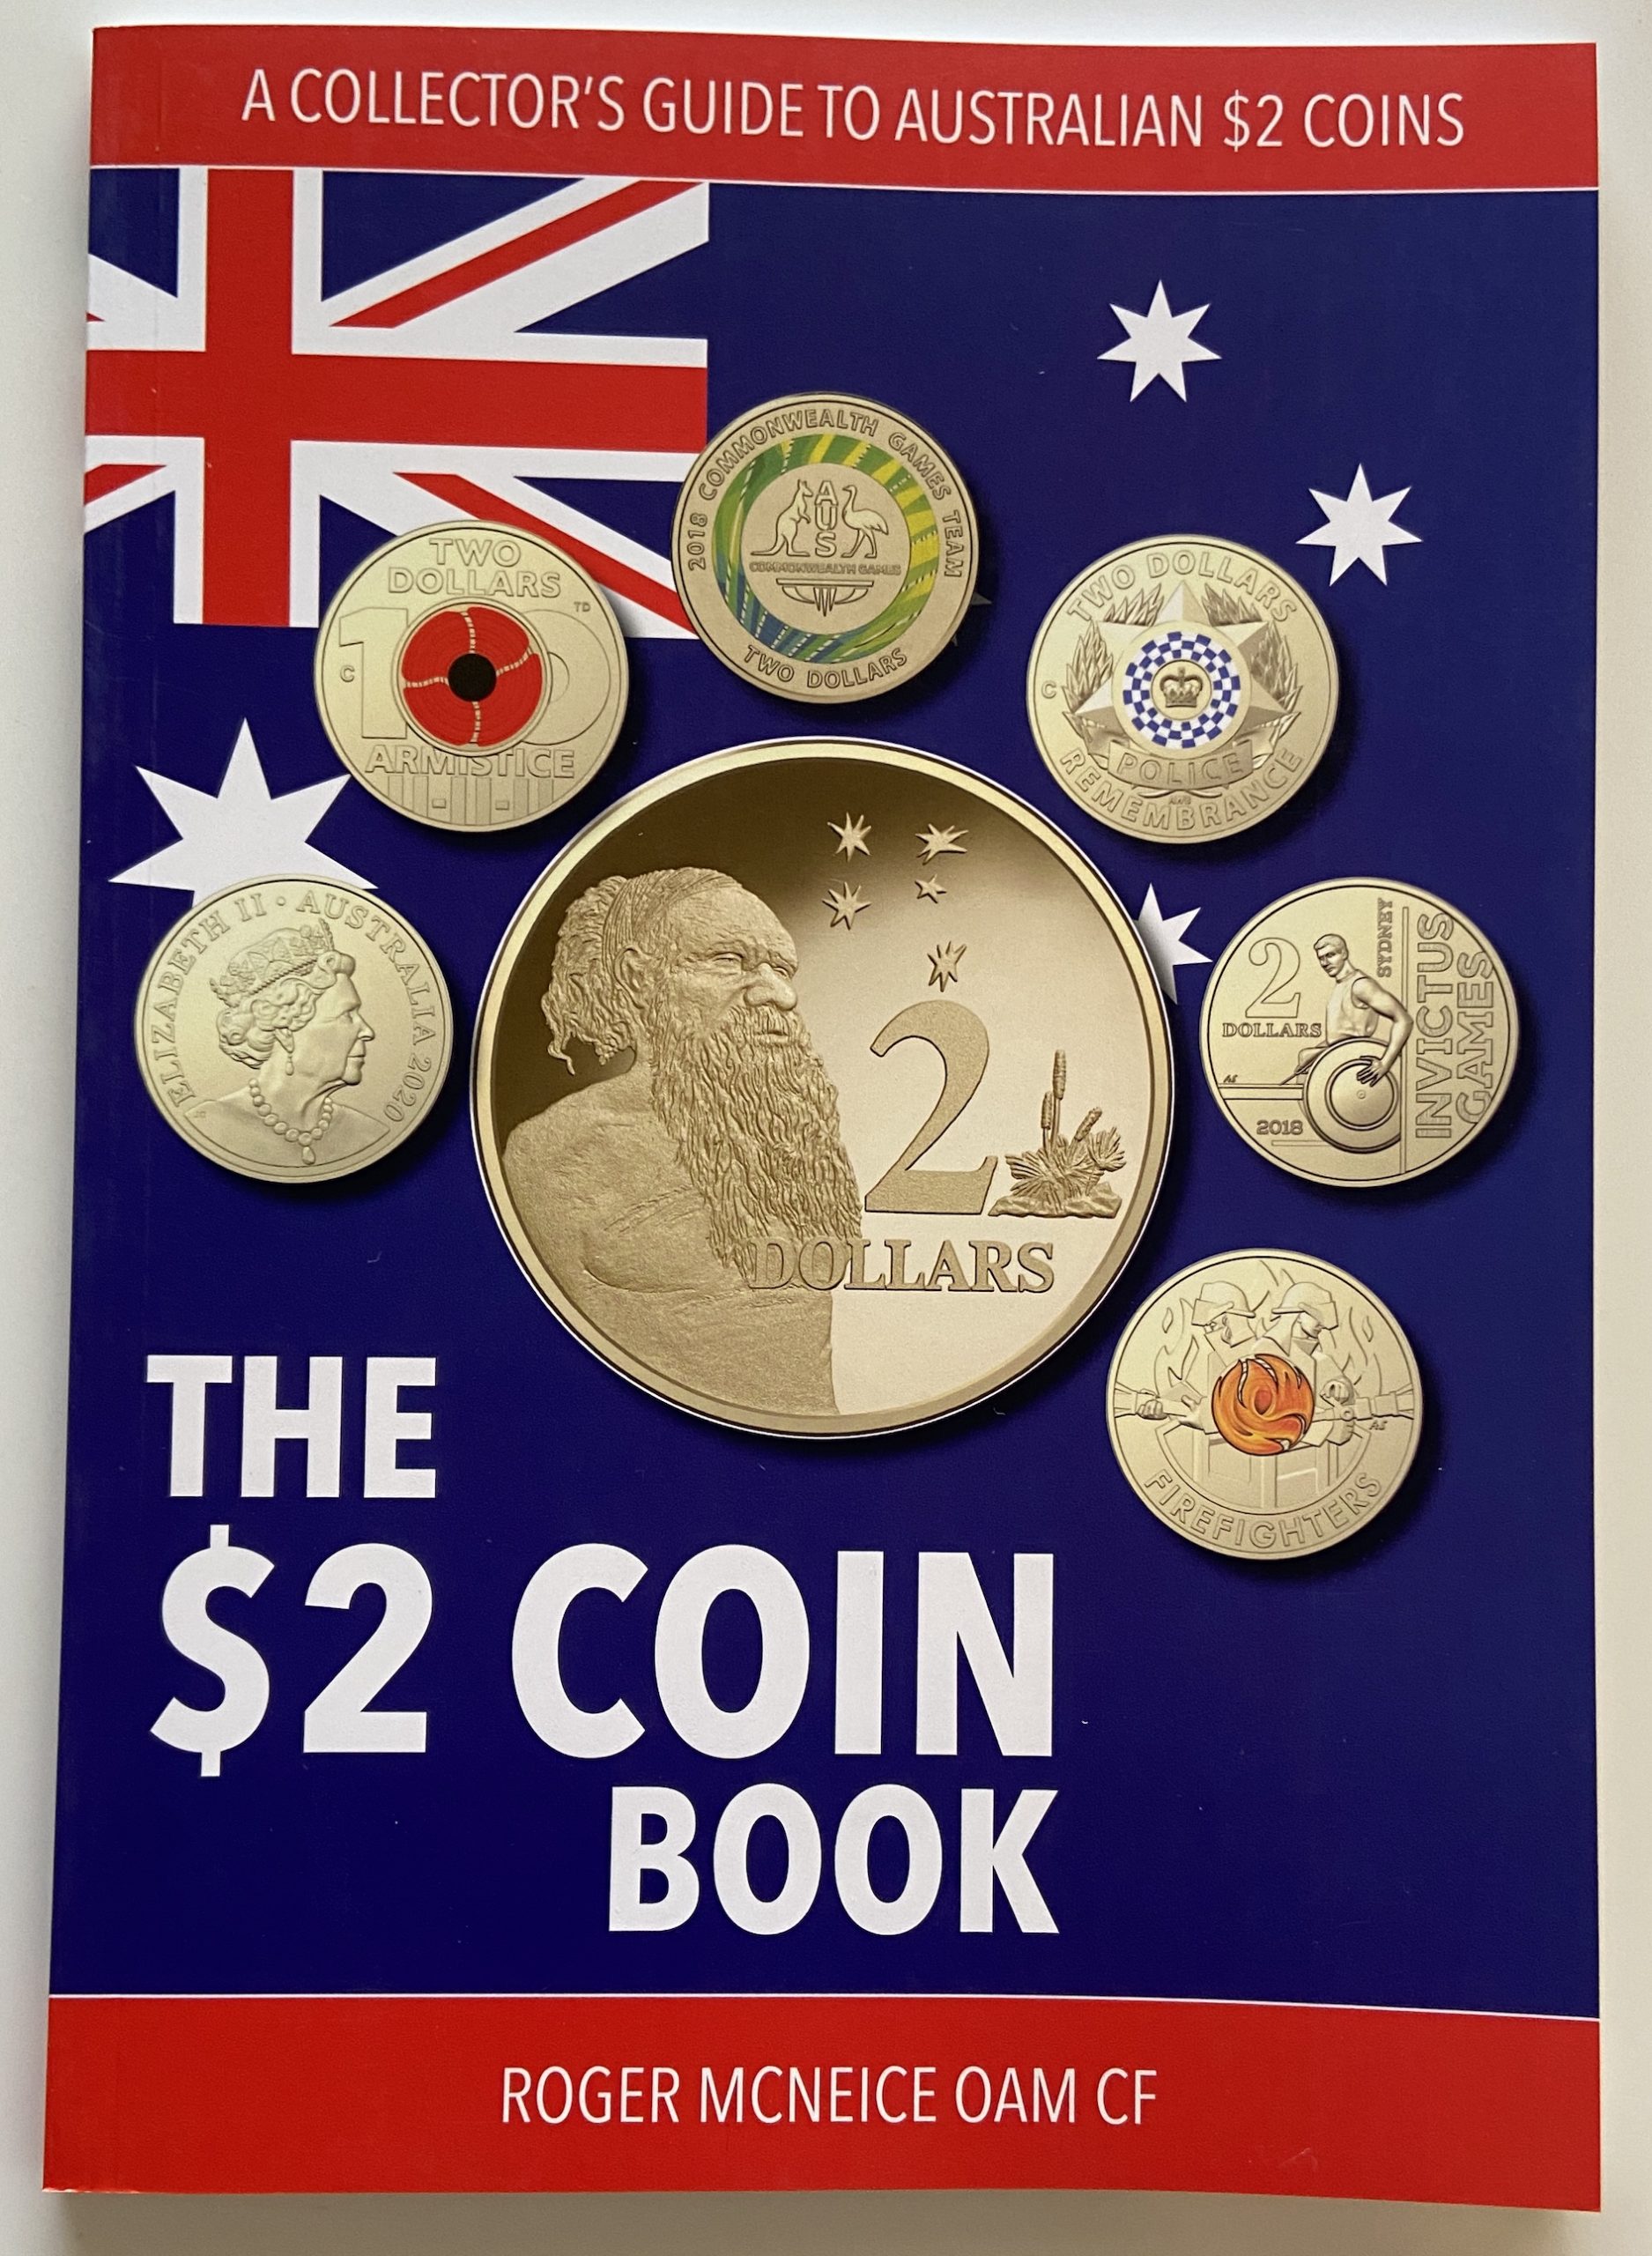 The 2 Coin Book by Roger Mcneice Bexley Stamp and